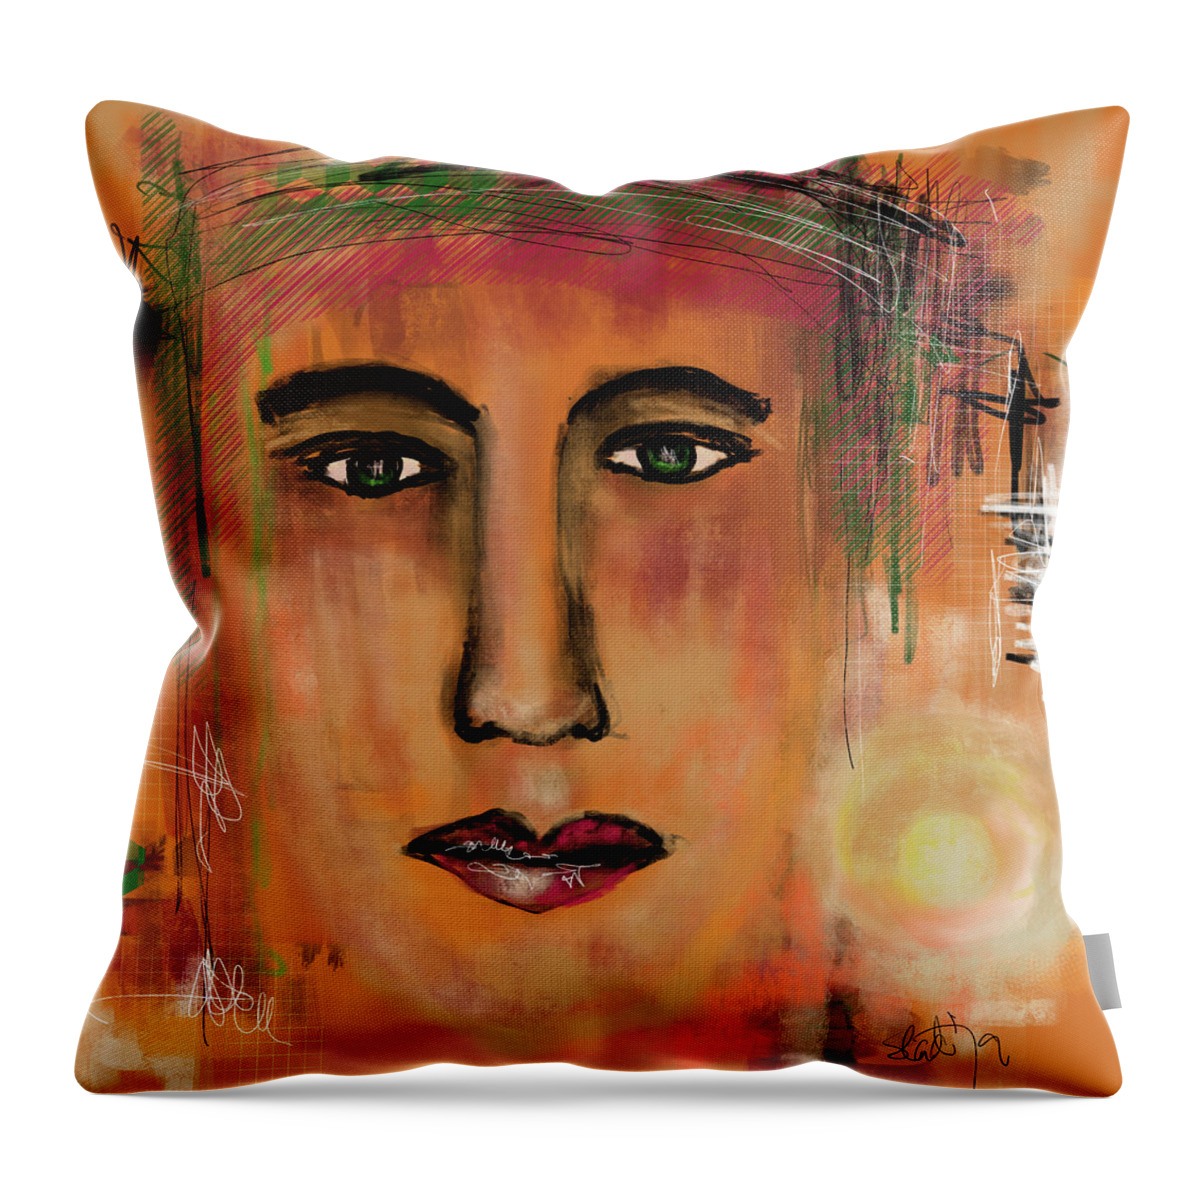 Never Give Up Throw Pillow featuring the digital art Never give up by Sladjana Lazarevic